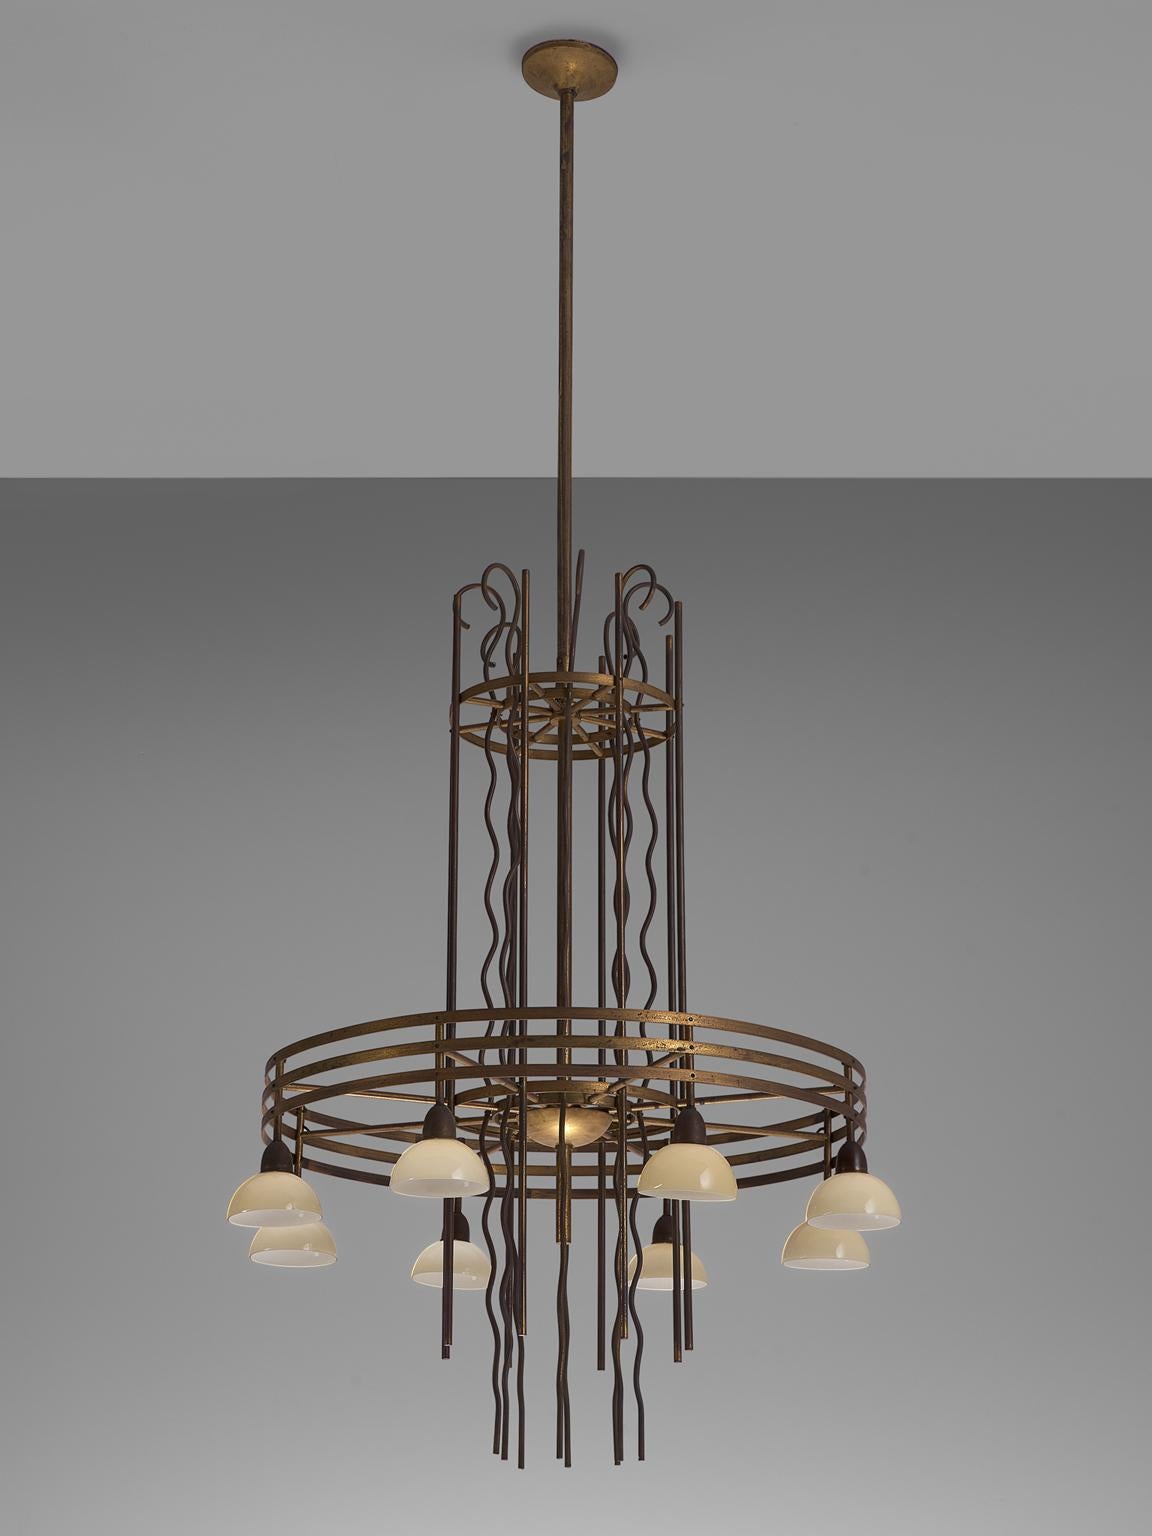 Art Deco chandelier, Sweden, 1930s.

Highly detailed brass chandelier from Sweden, made in the 1930s. This chandelier features two layers of multiple brass rings and organic shaped brass strings in between. The first layer contains one ring to